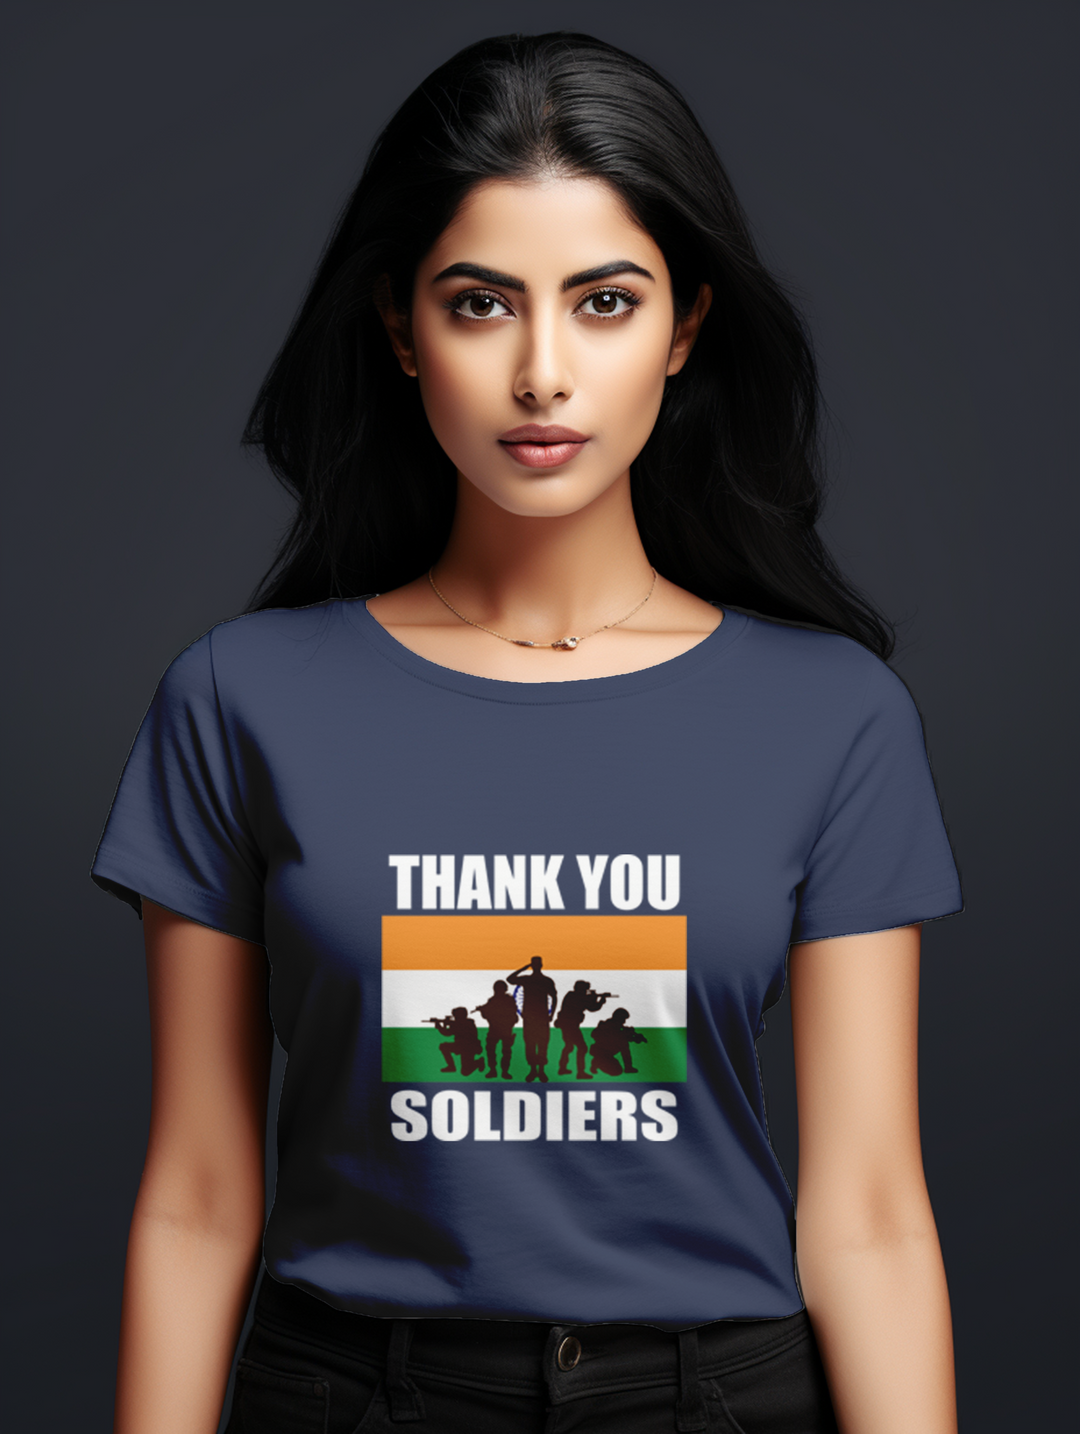 Women's Thank You Soldiers tee